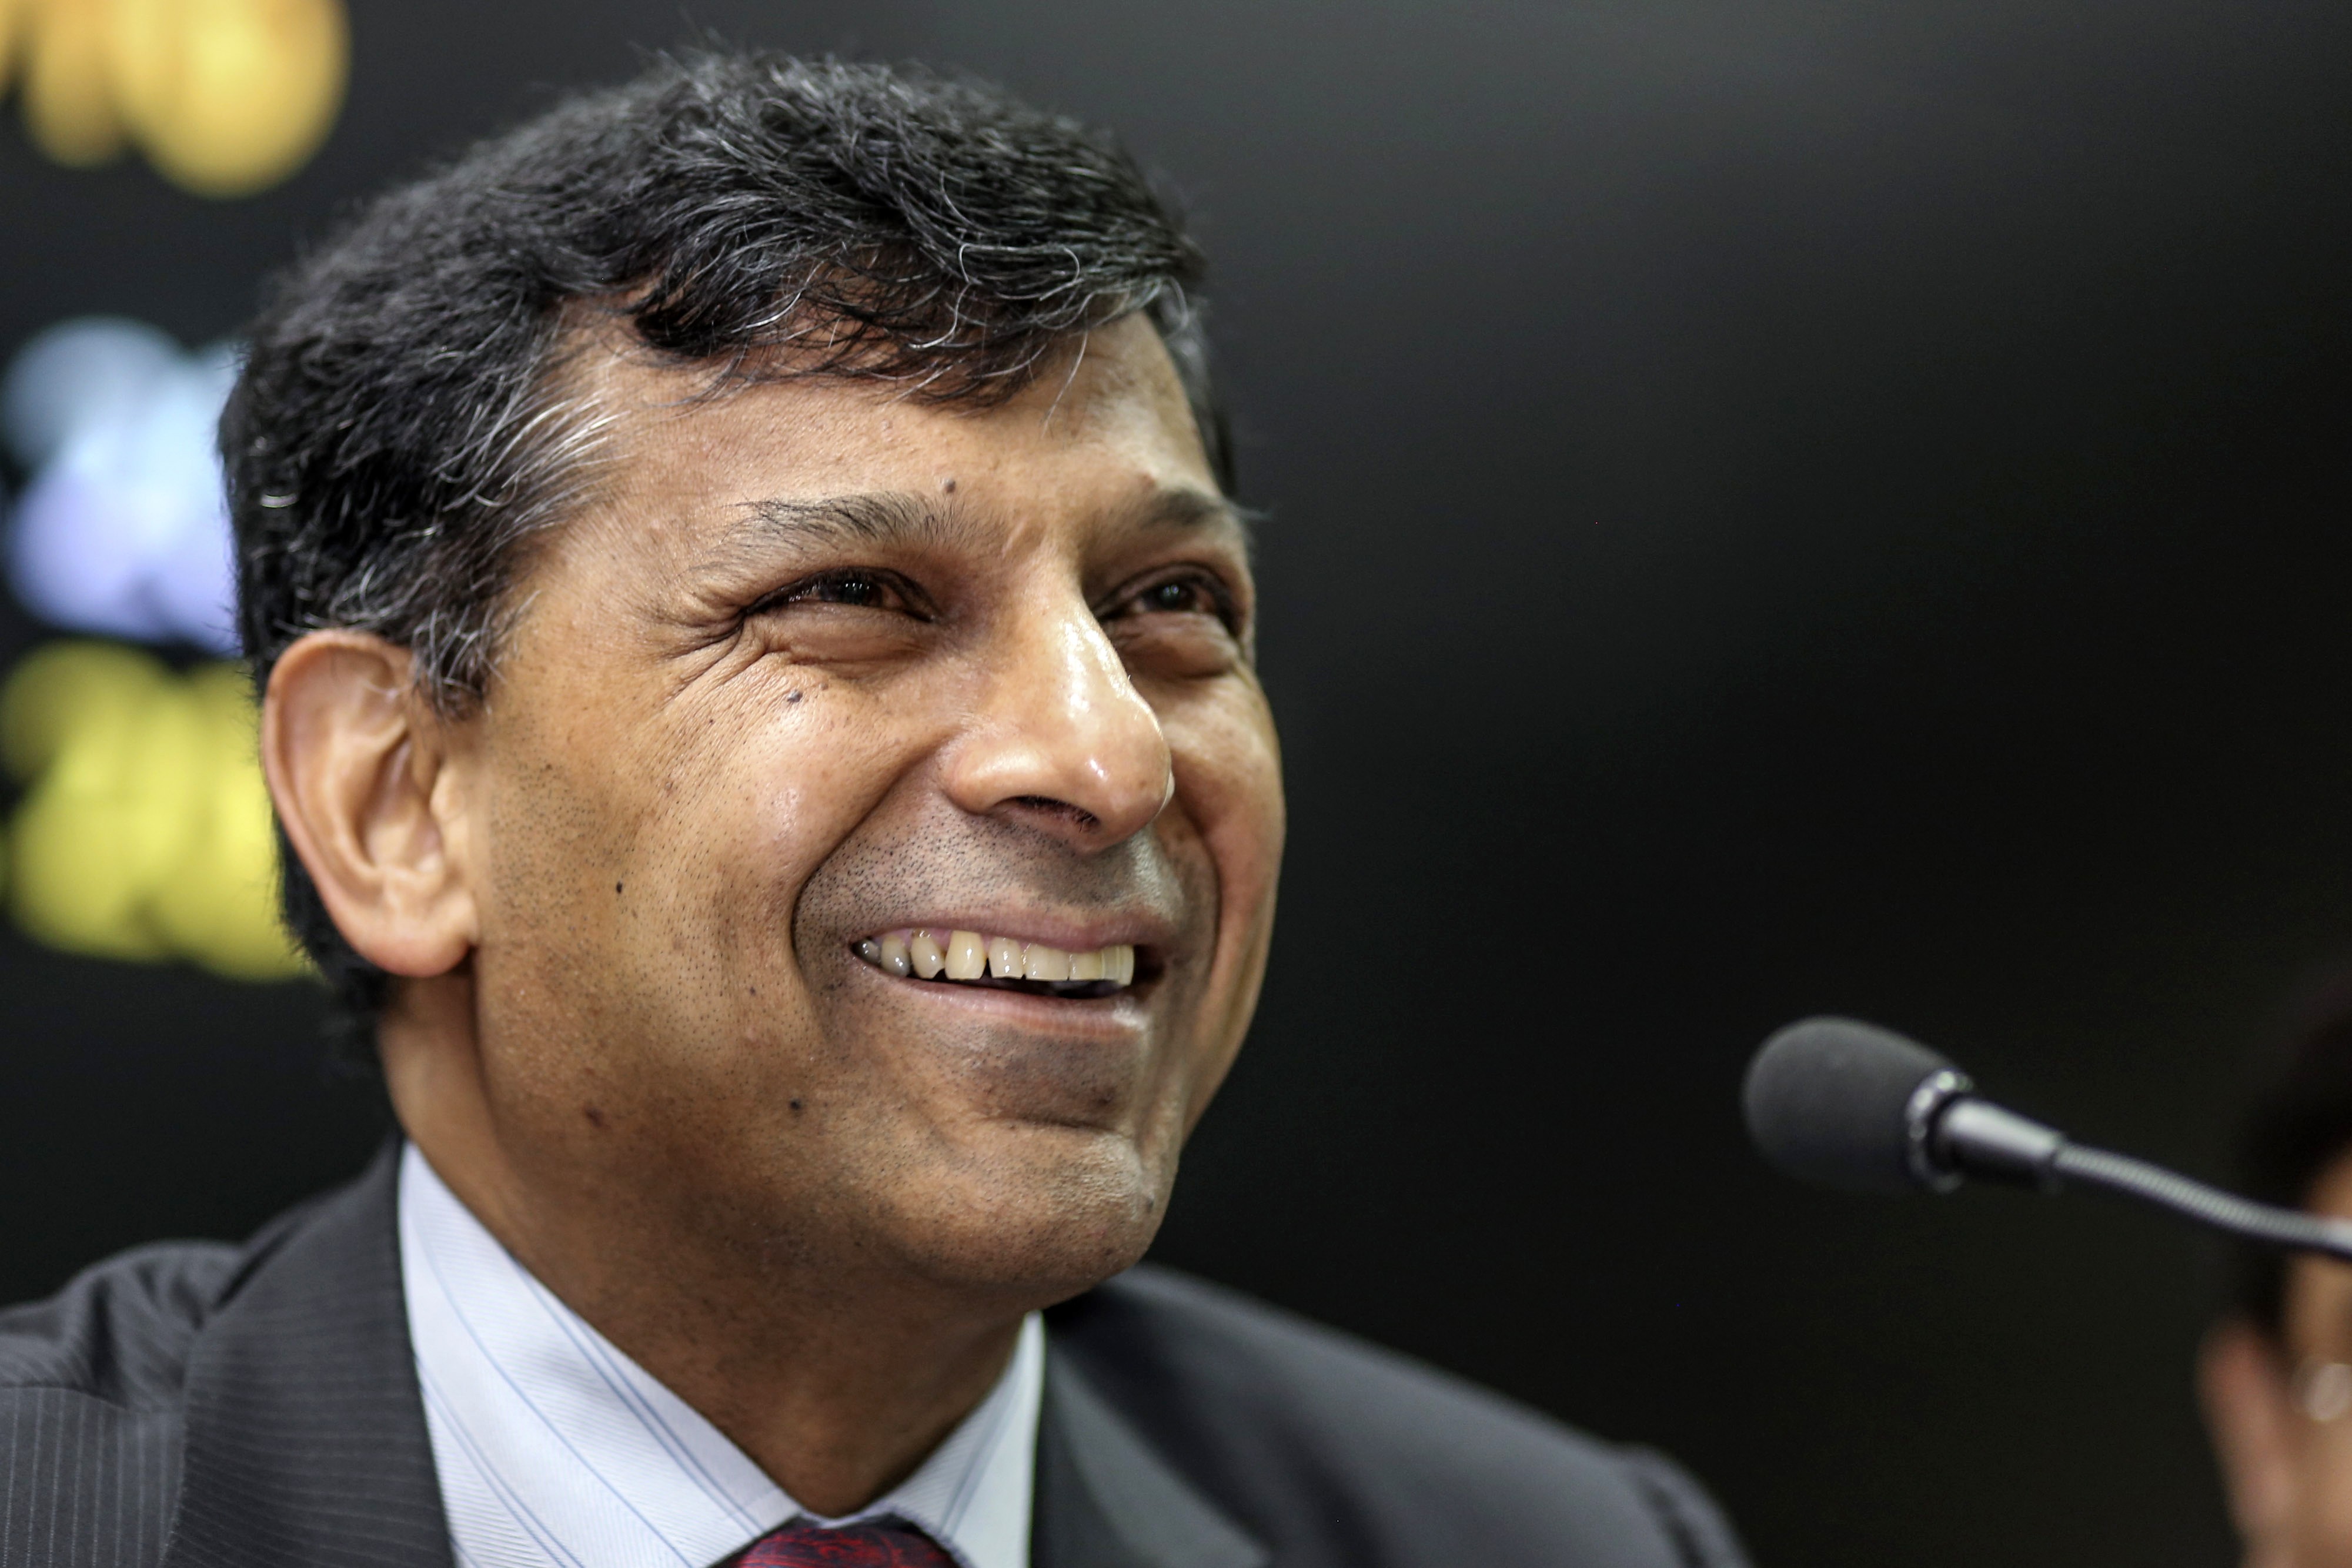 Indian economist Raghuram Rajan, who correctly called the subprime crisis, is worried about growing imbalances and the possibility of another global shakeout